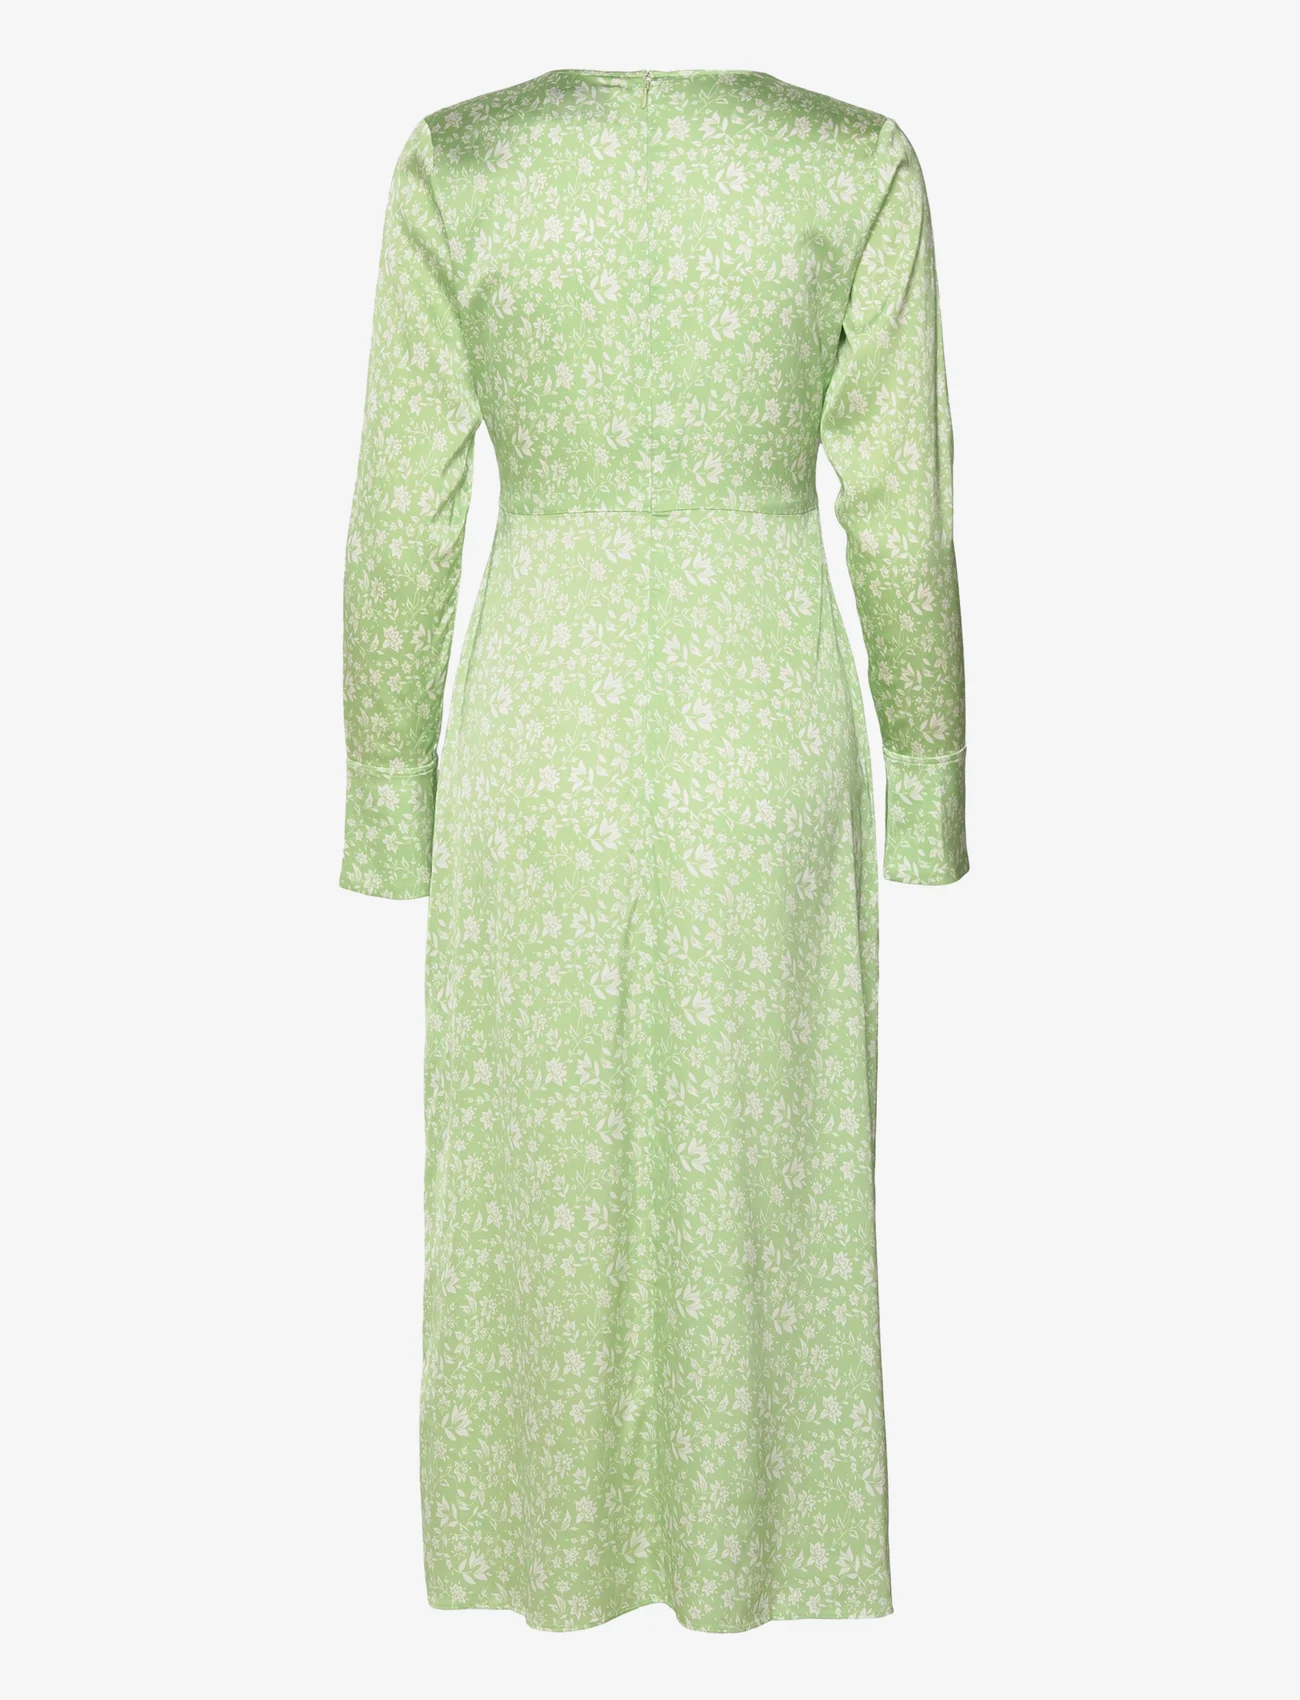 MAUD - Eve Dress - party wear at outlet prices - faded green - 1